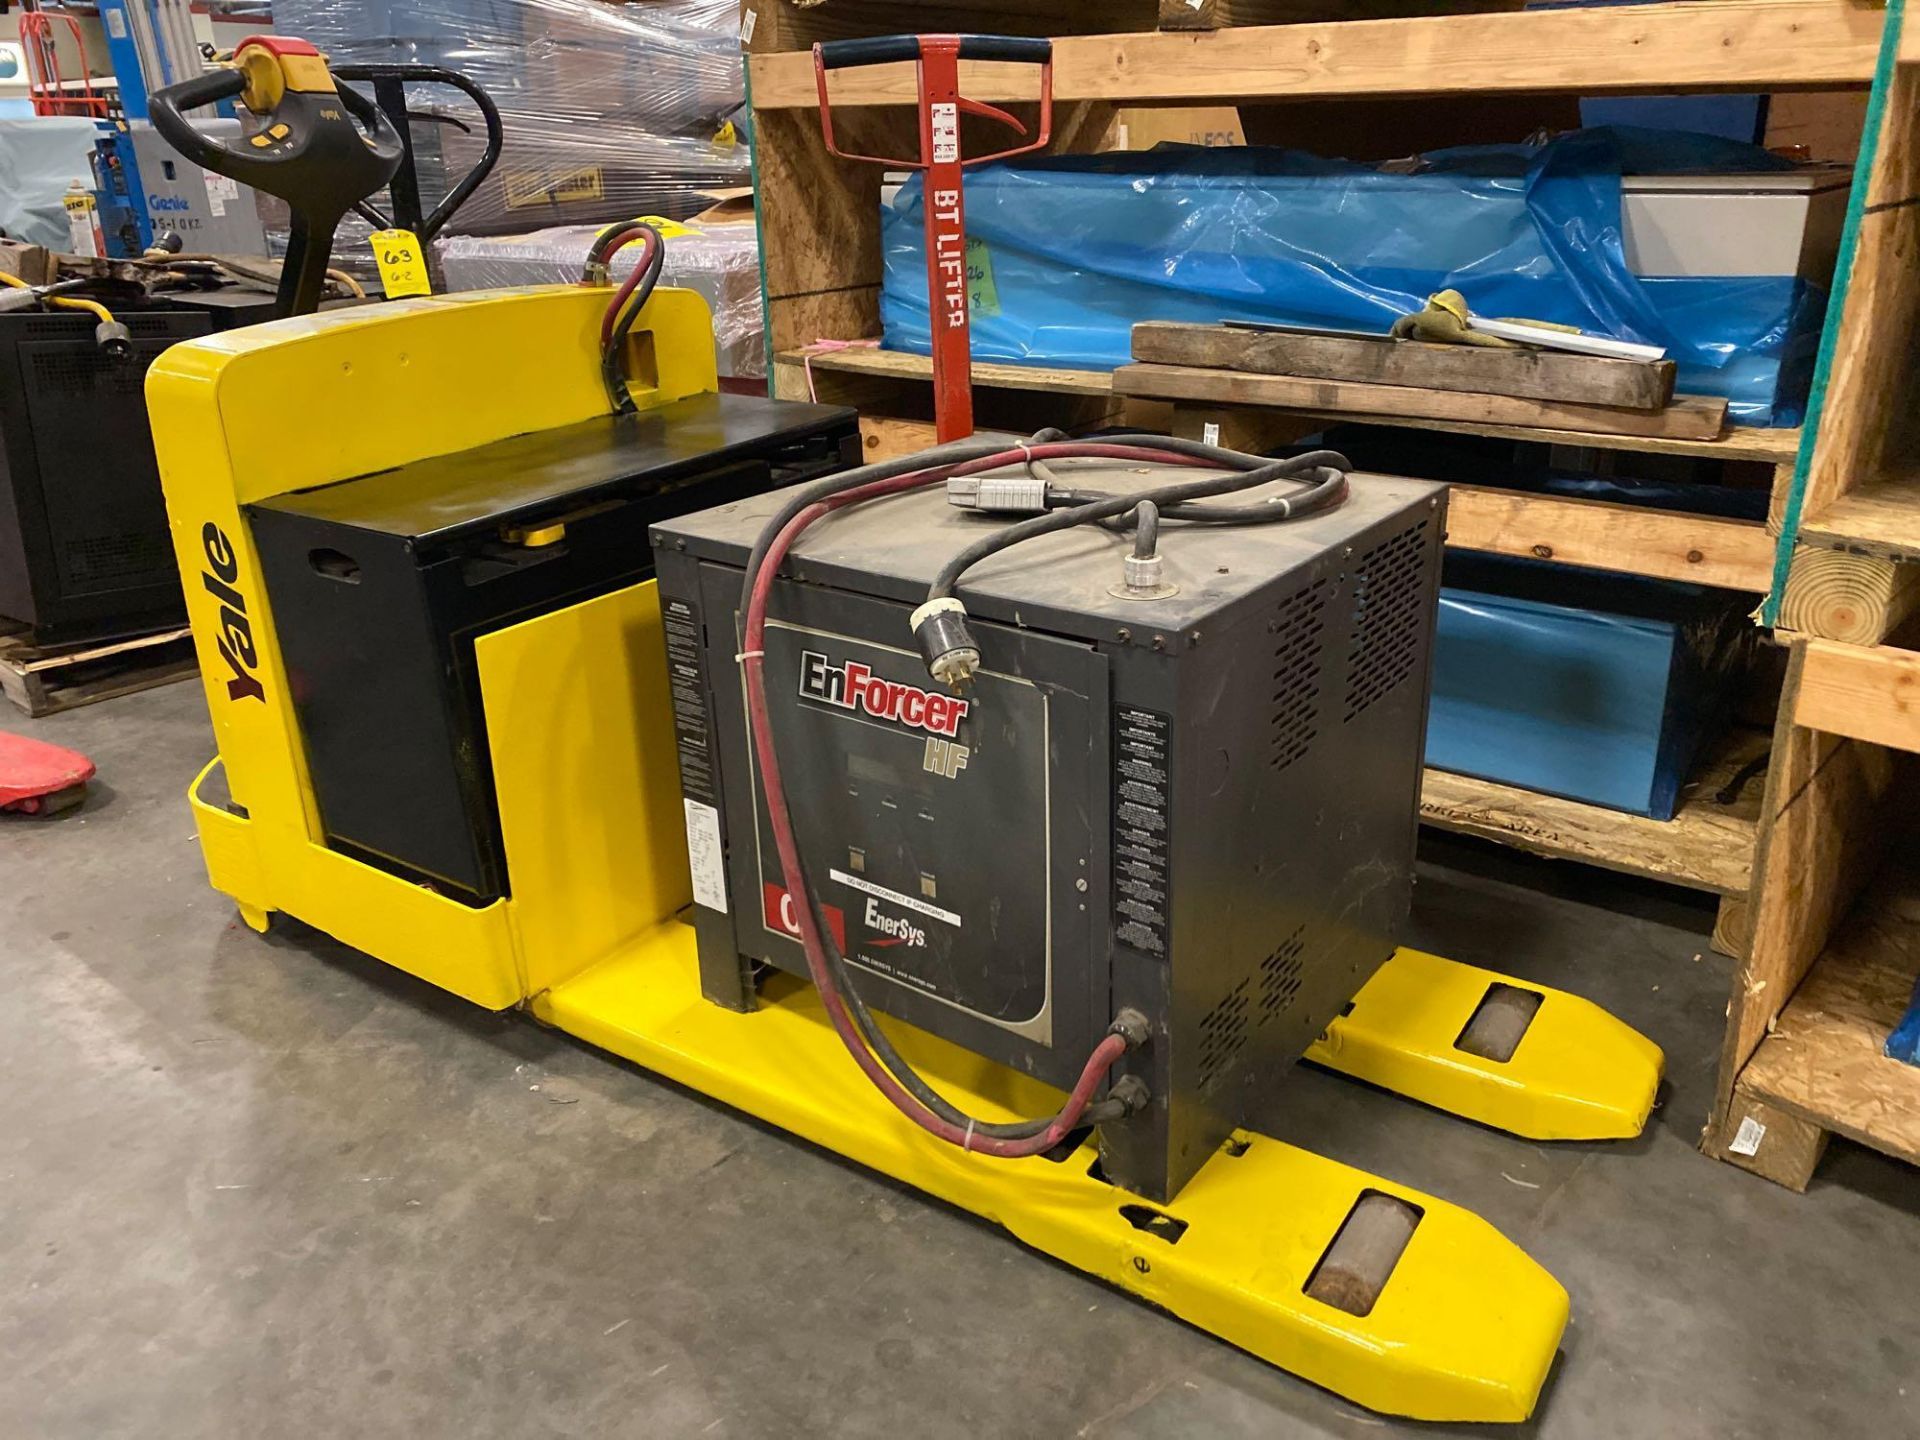 YALE ELECTRIC PALLET JACK MODEL MPW060, 24V, 6,000 LB CAPACITY, 737 HOURS SHOWING, CHARGER INCLUDED, - Image 3 of 5